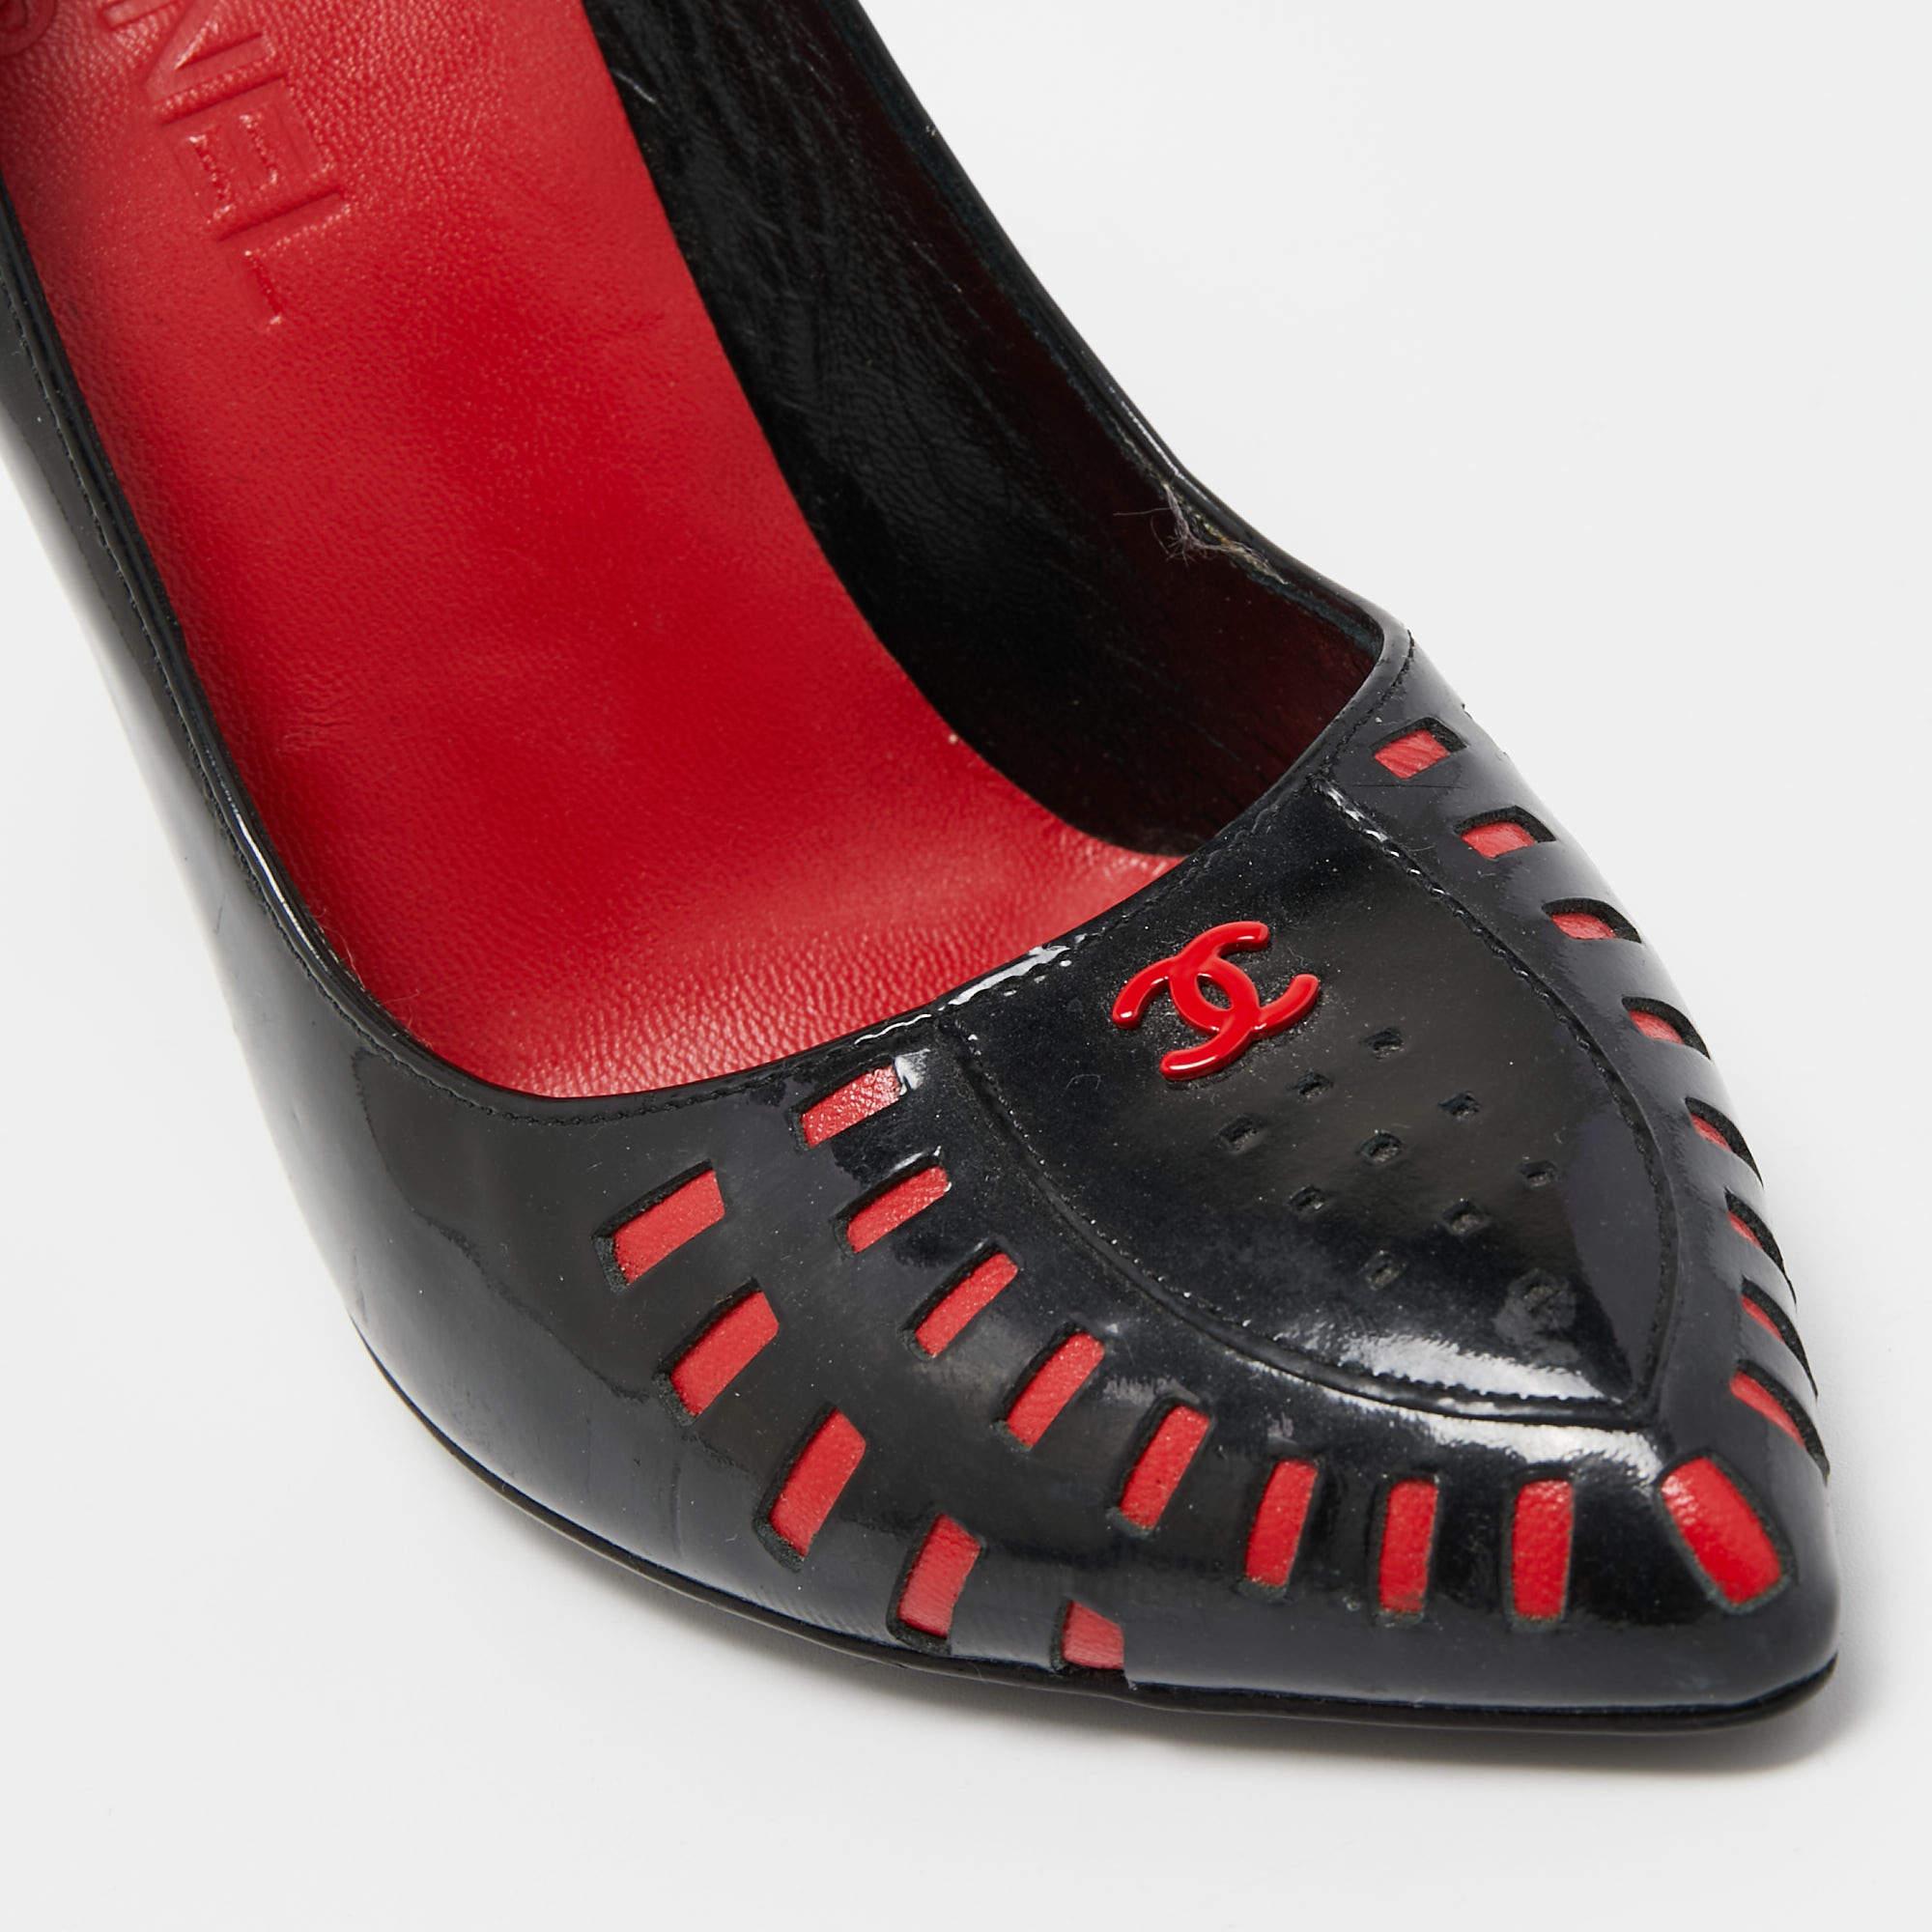 Chanel Black/Red Patent Pointed Toe Pumps Size 38 3